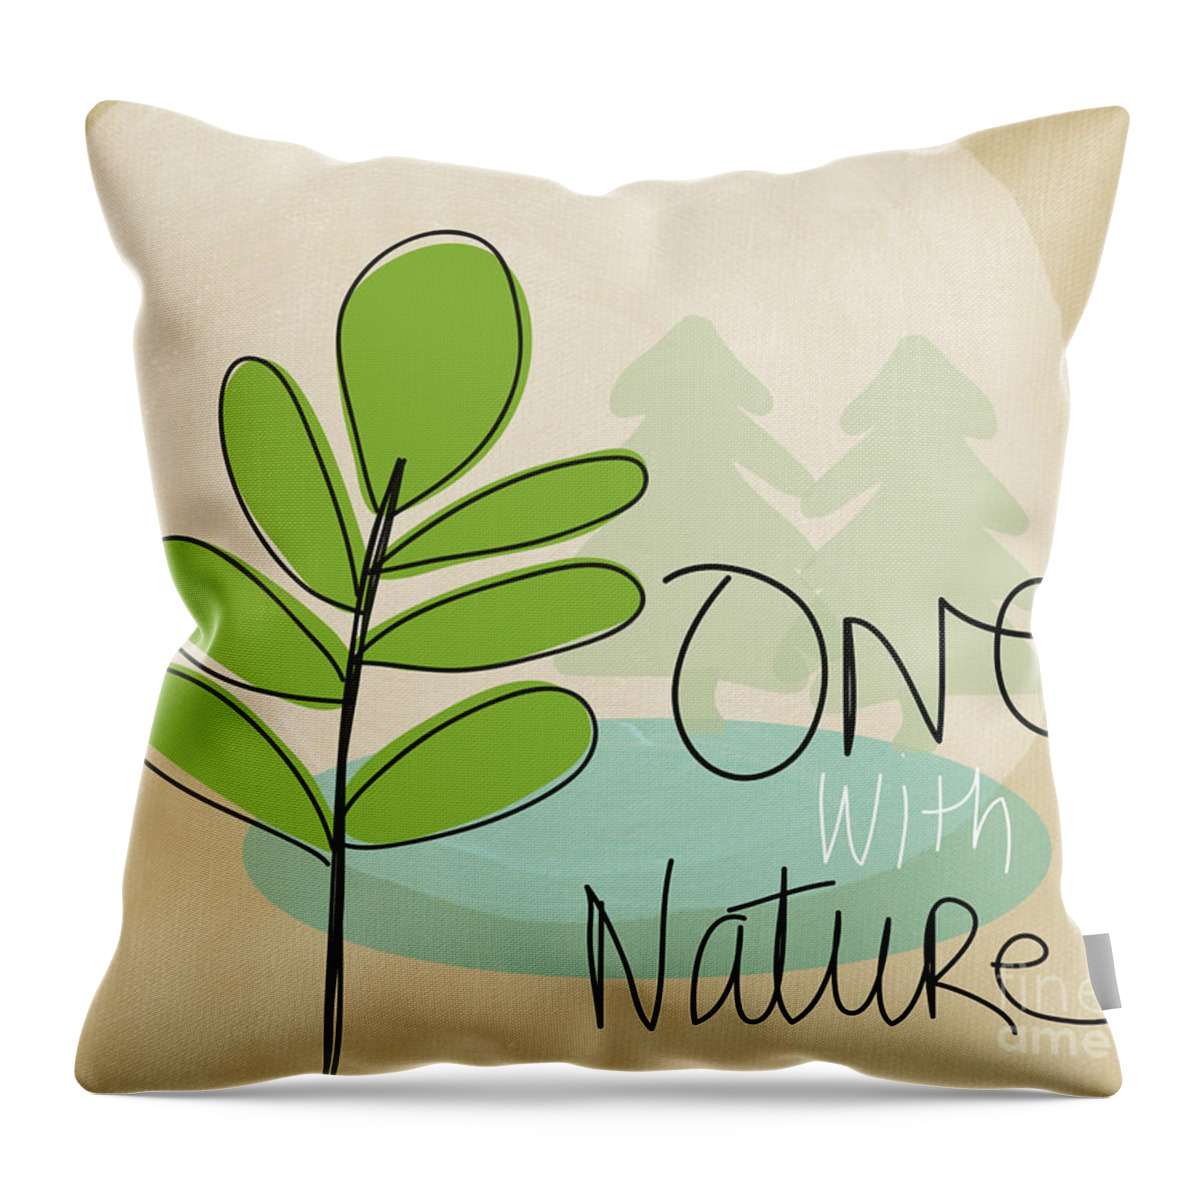 Tree Throw Pillow featuring the painting One With Nature by Linda Woods